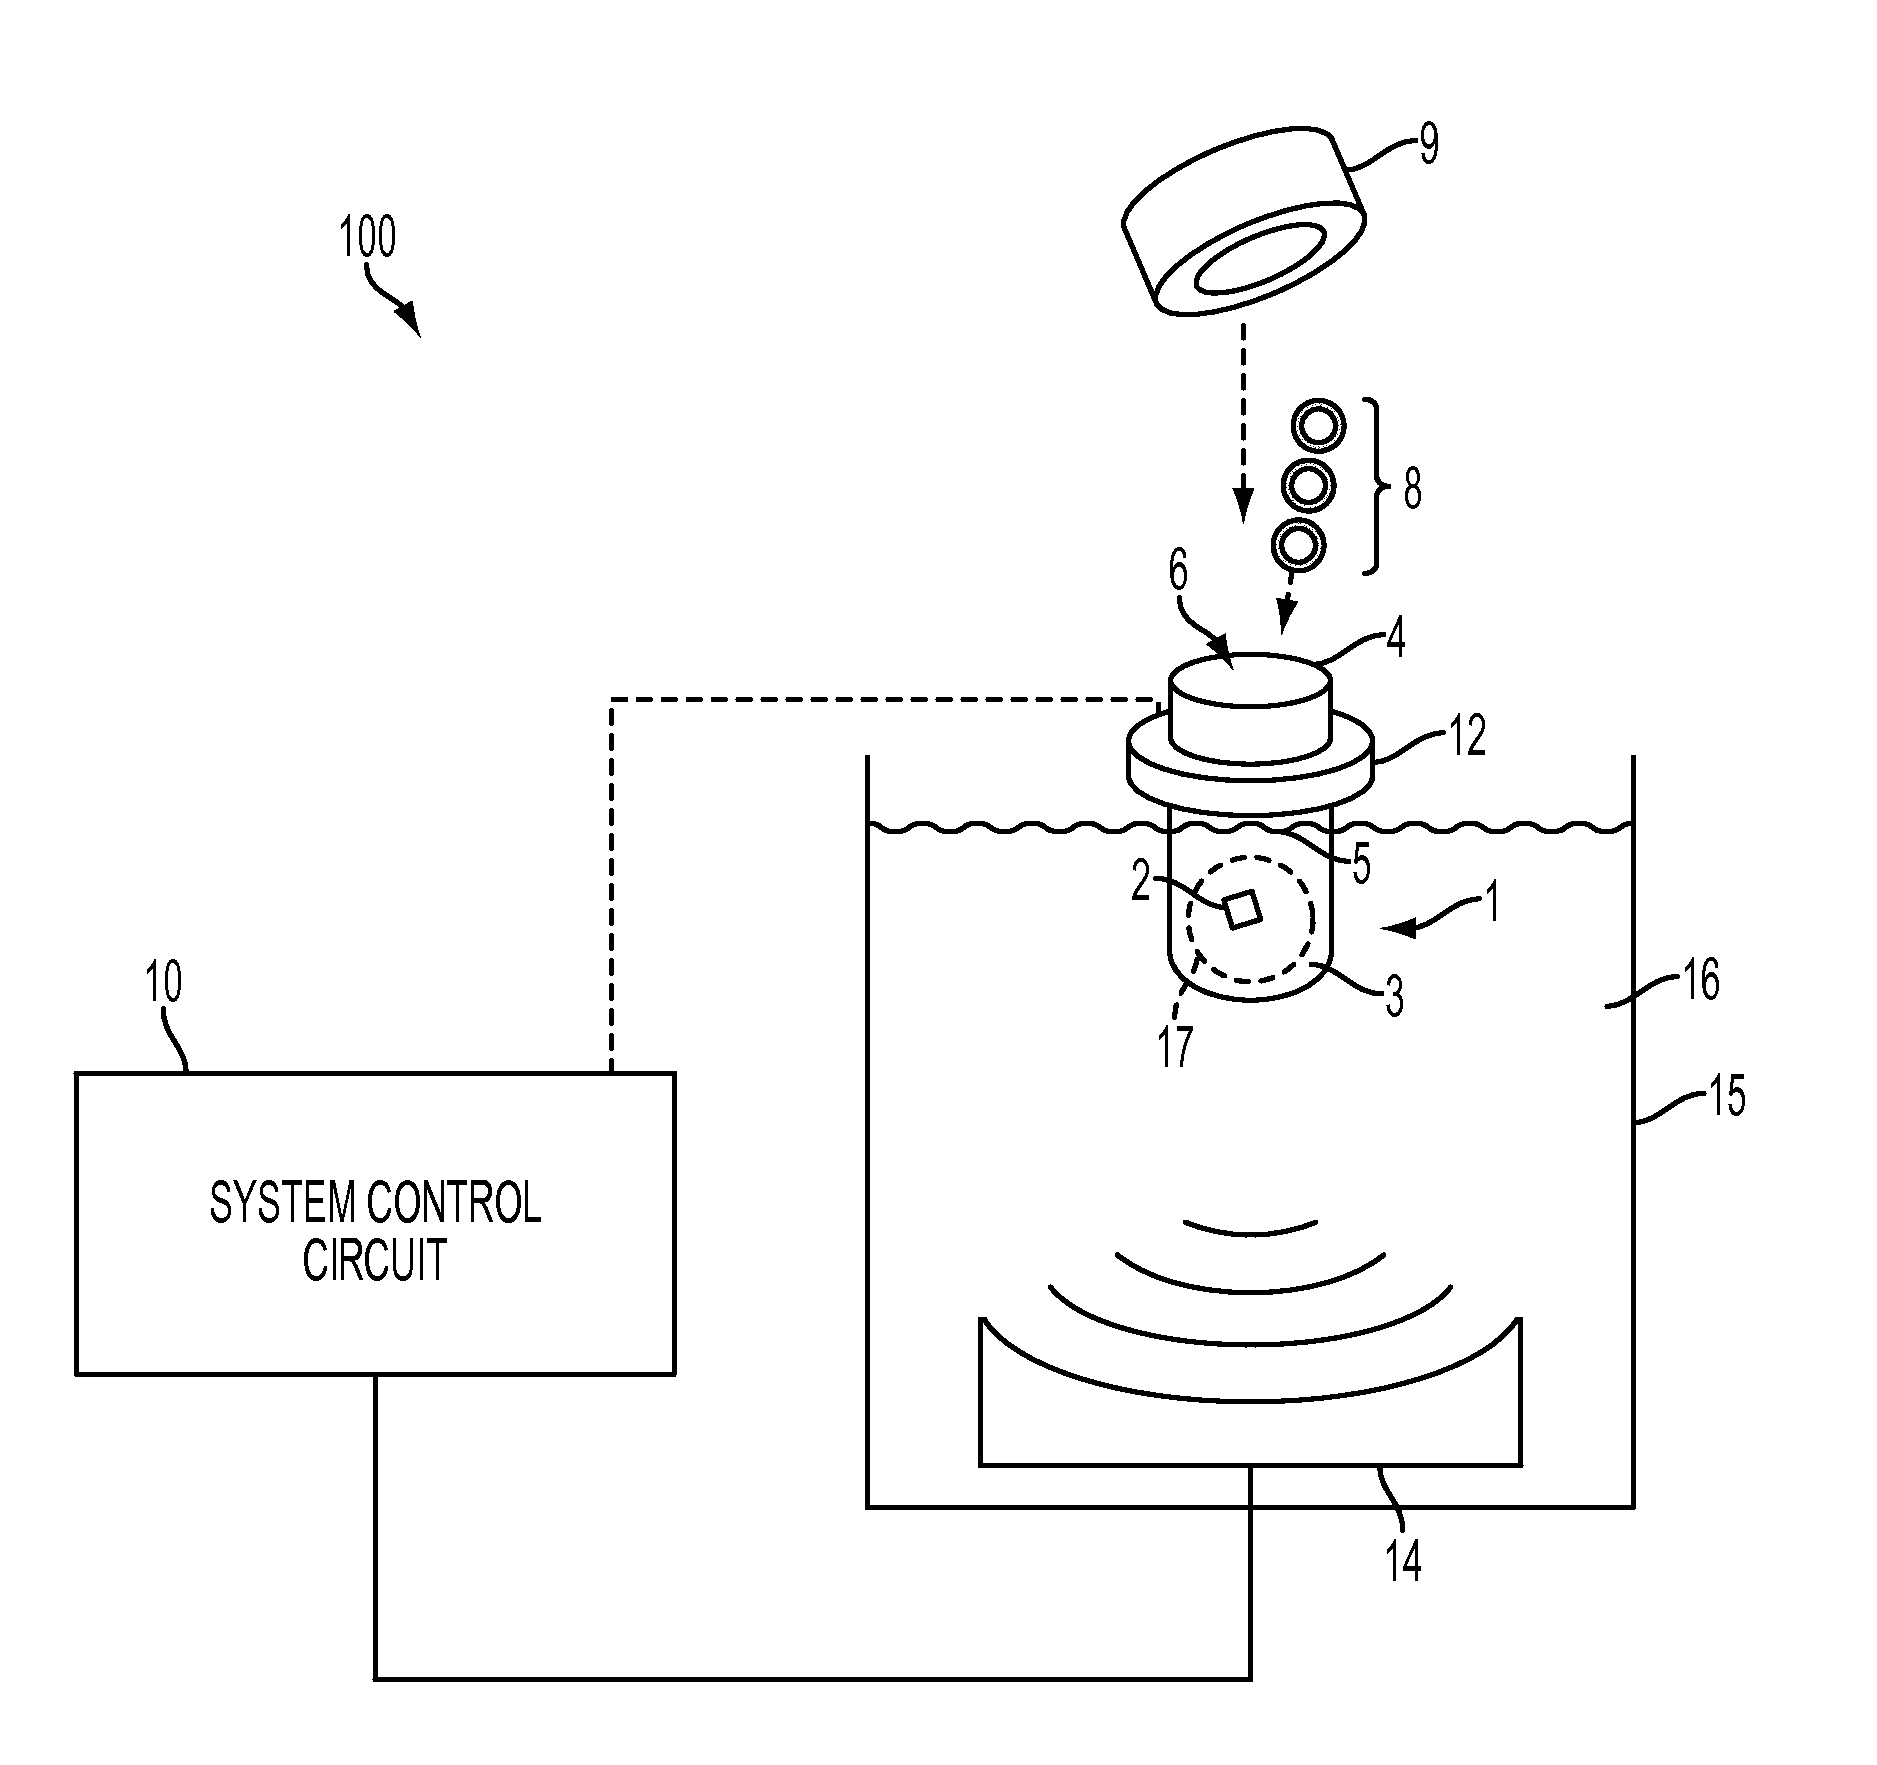 Method and apparatus for shearing of genomic material using acoustic processing